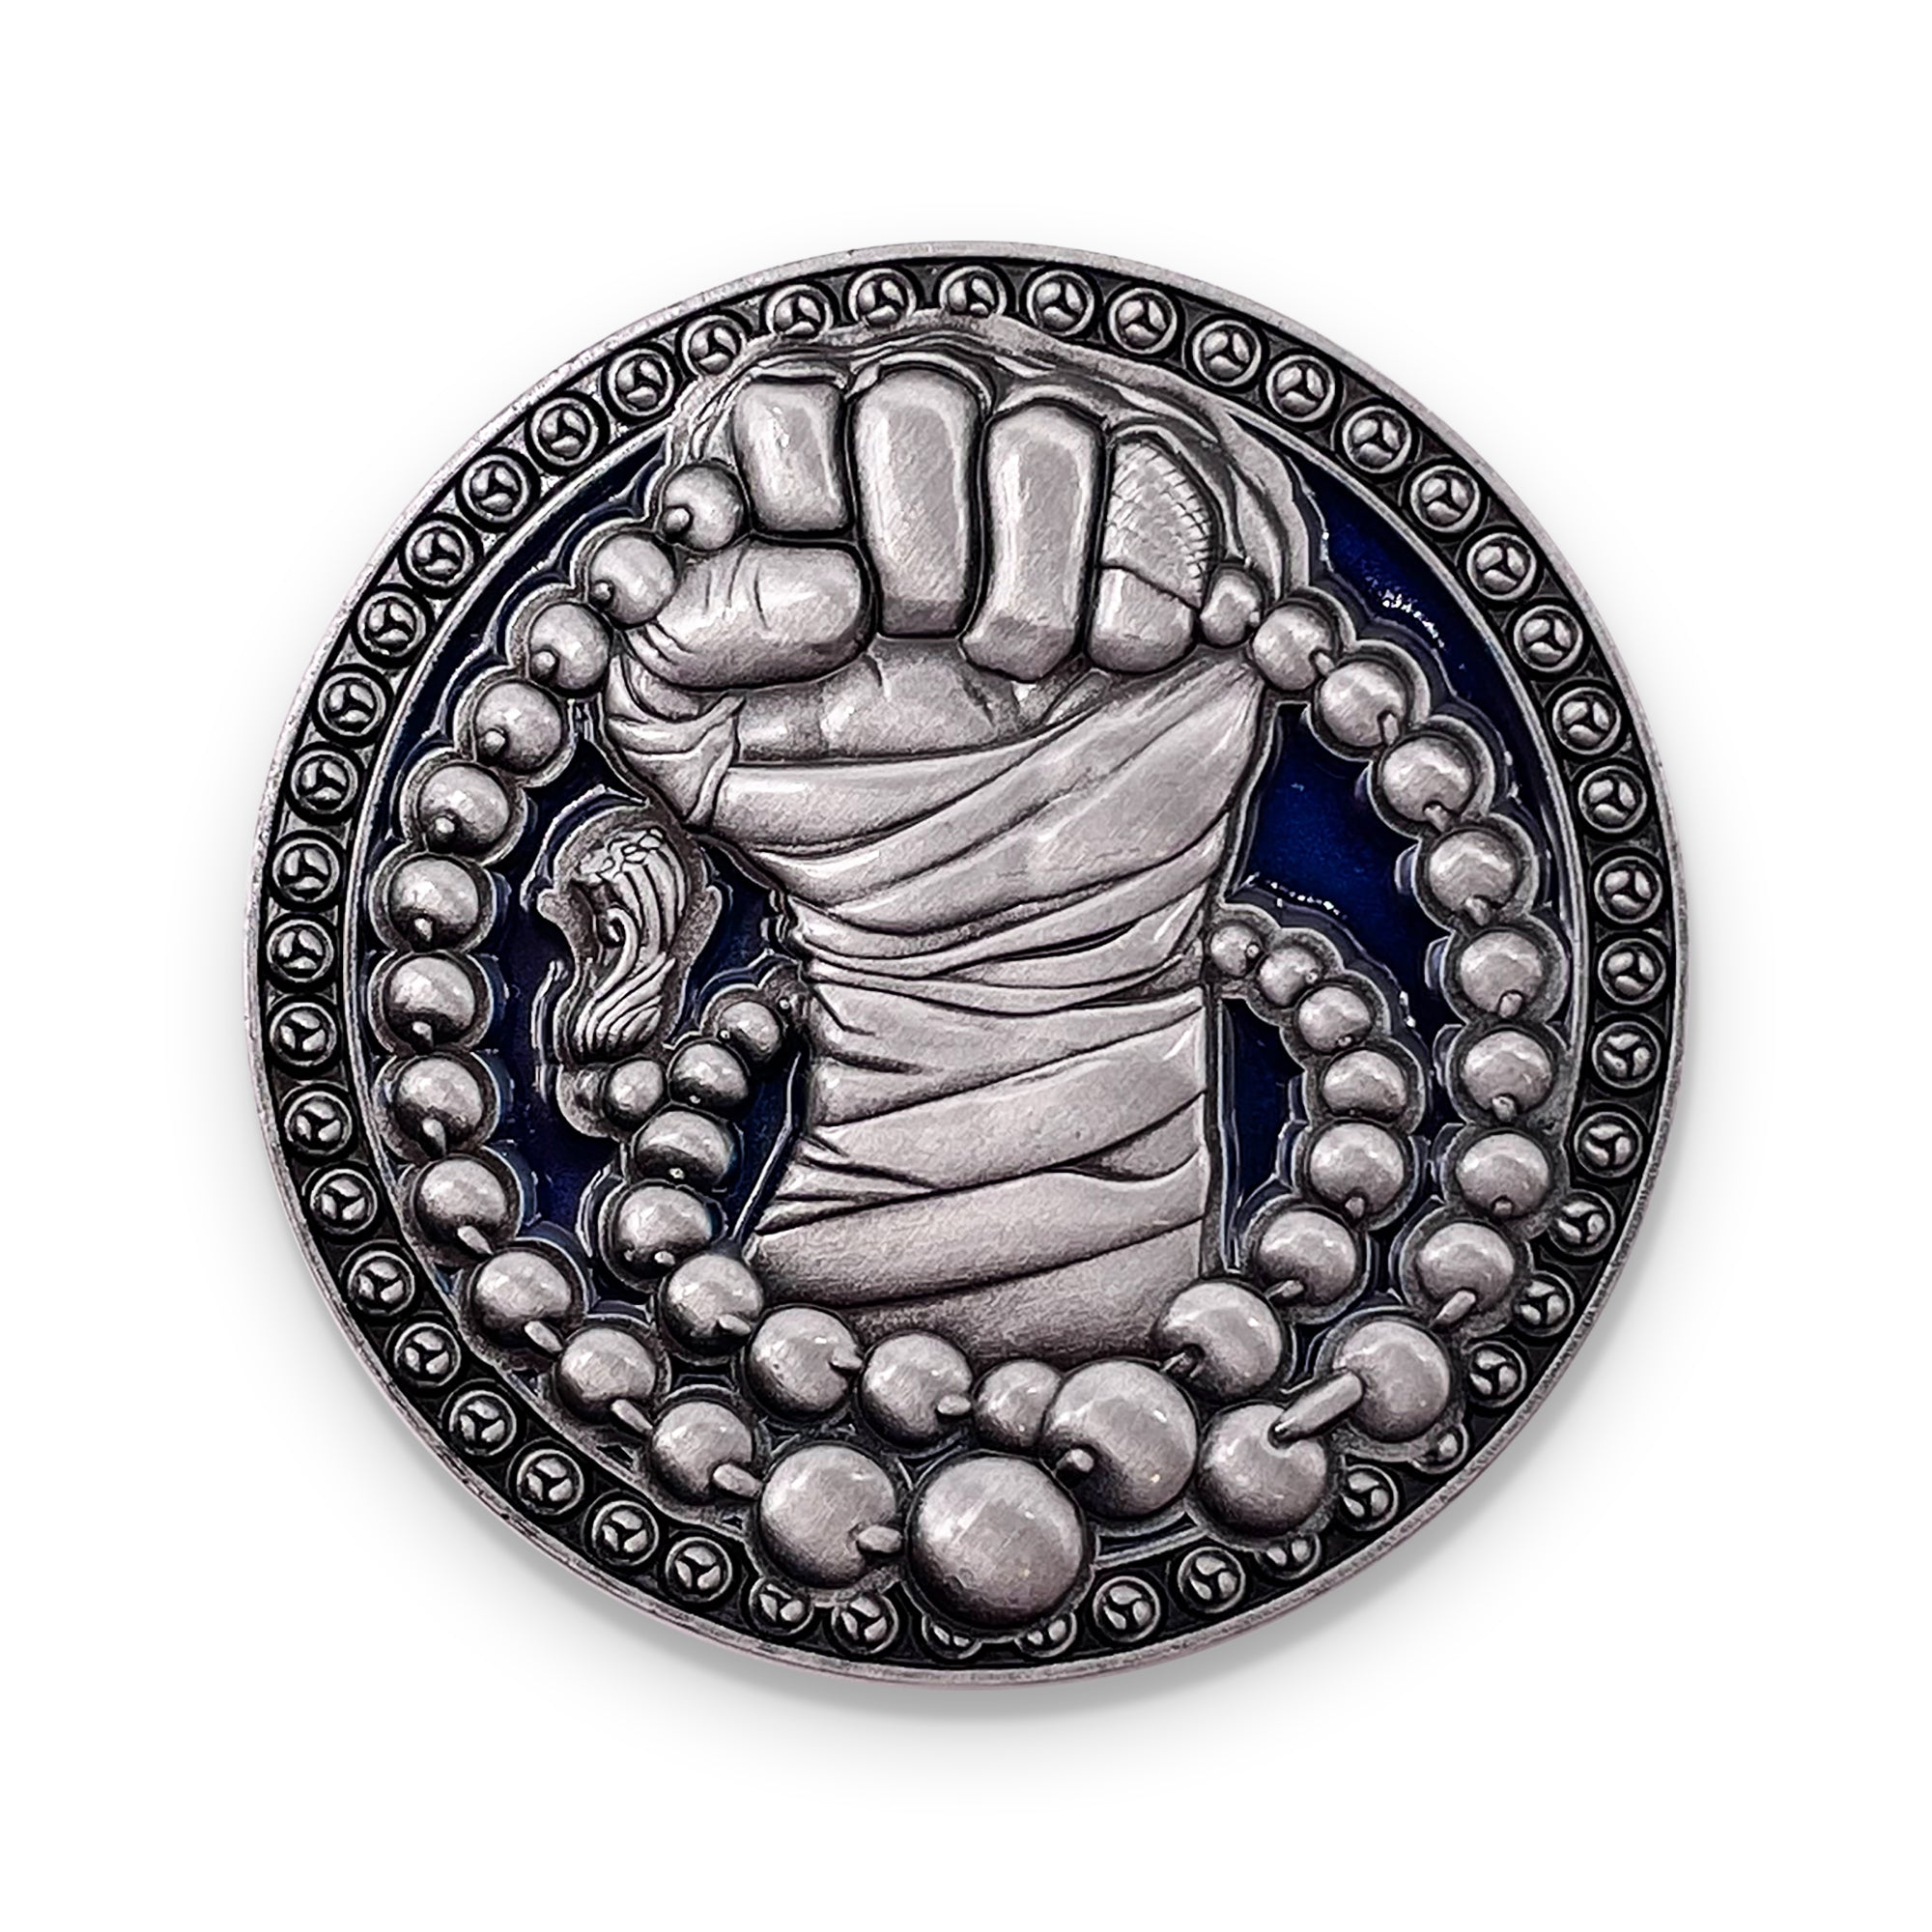 Monk - Single 45mm Profession Coin